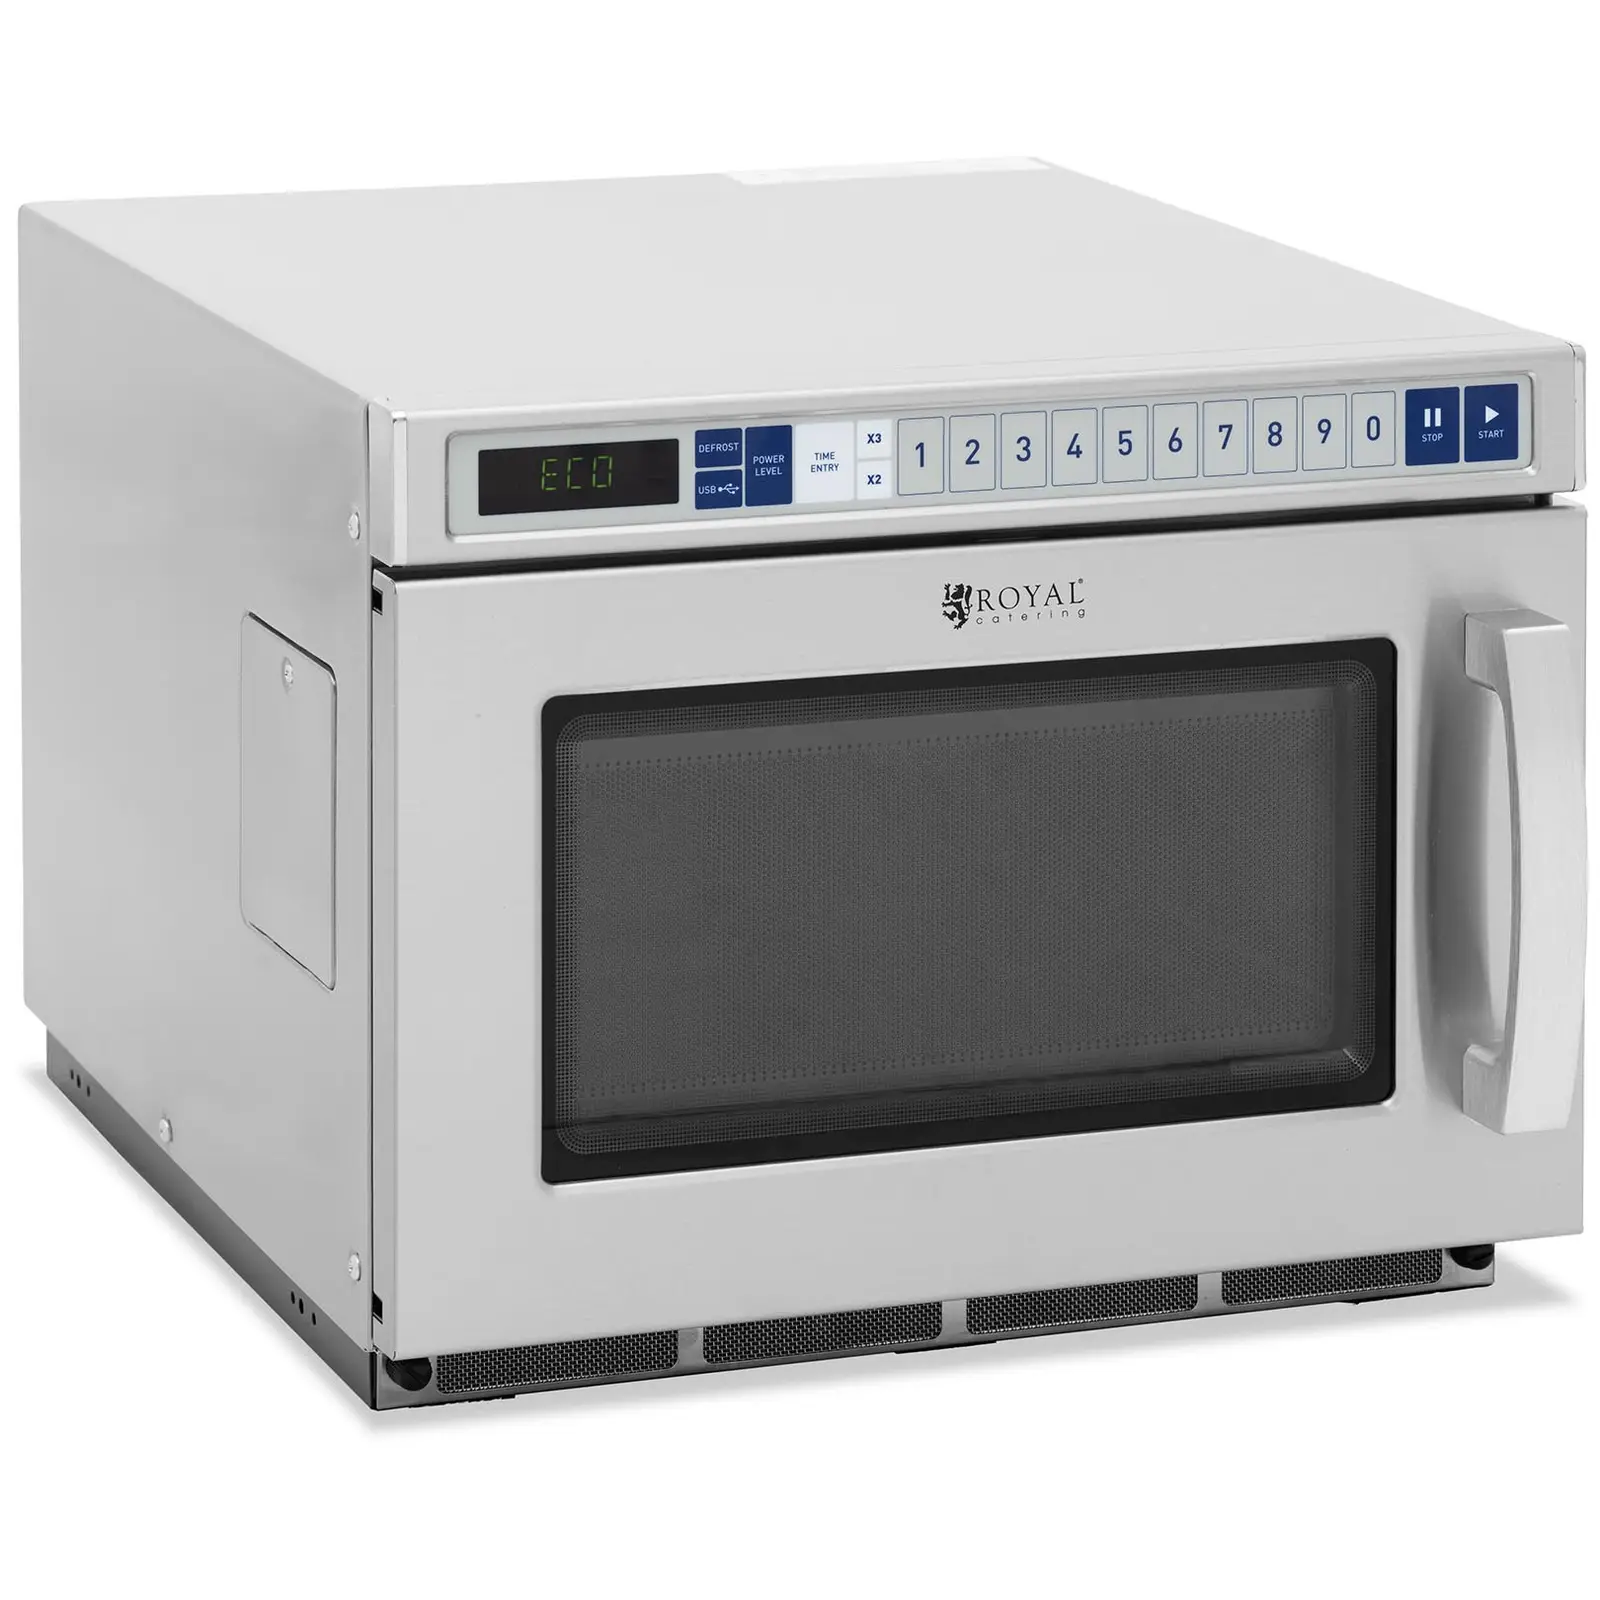 Microwave - 3000 W - 17 L - Royal Catering - 0